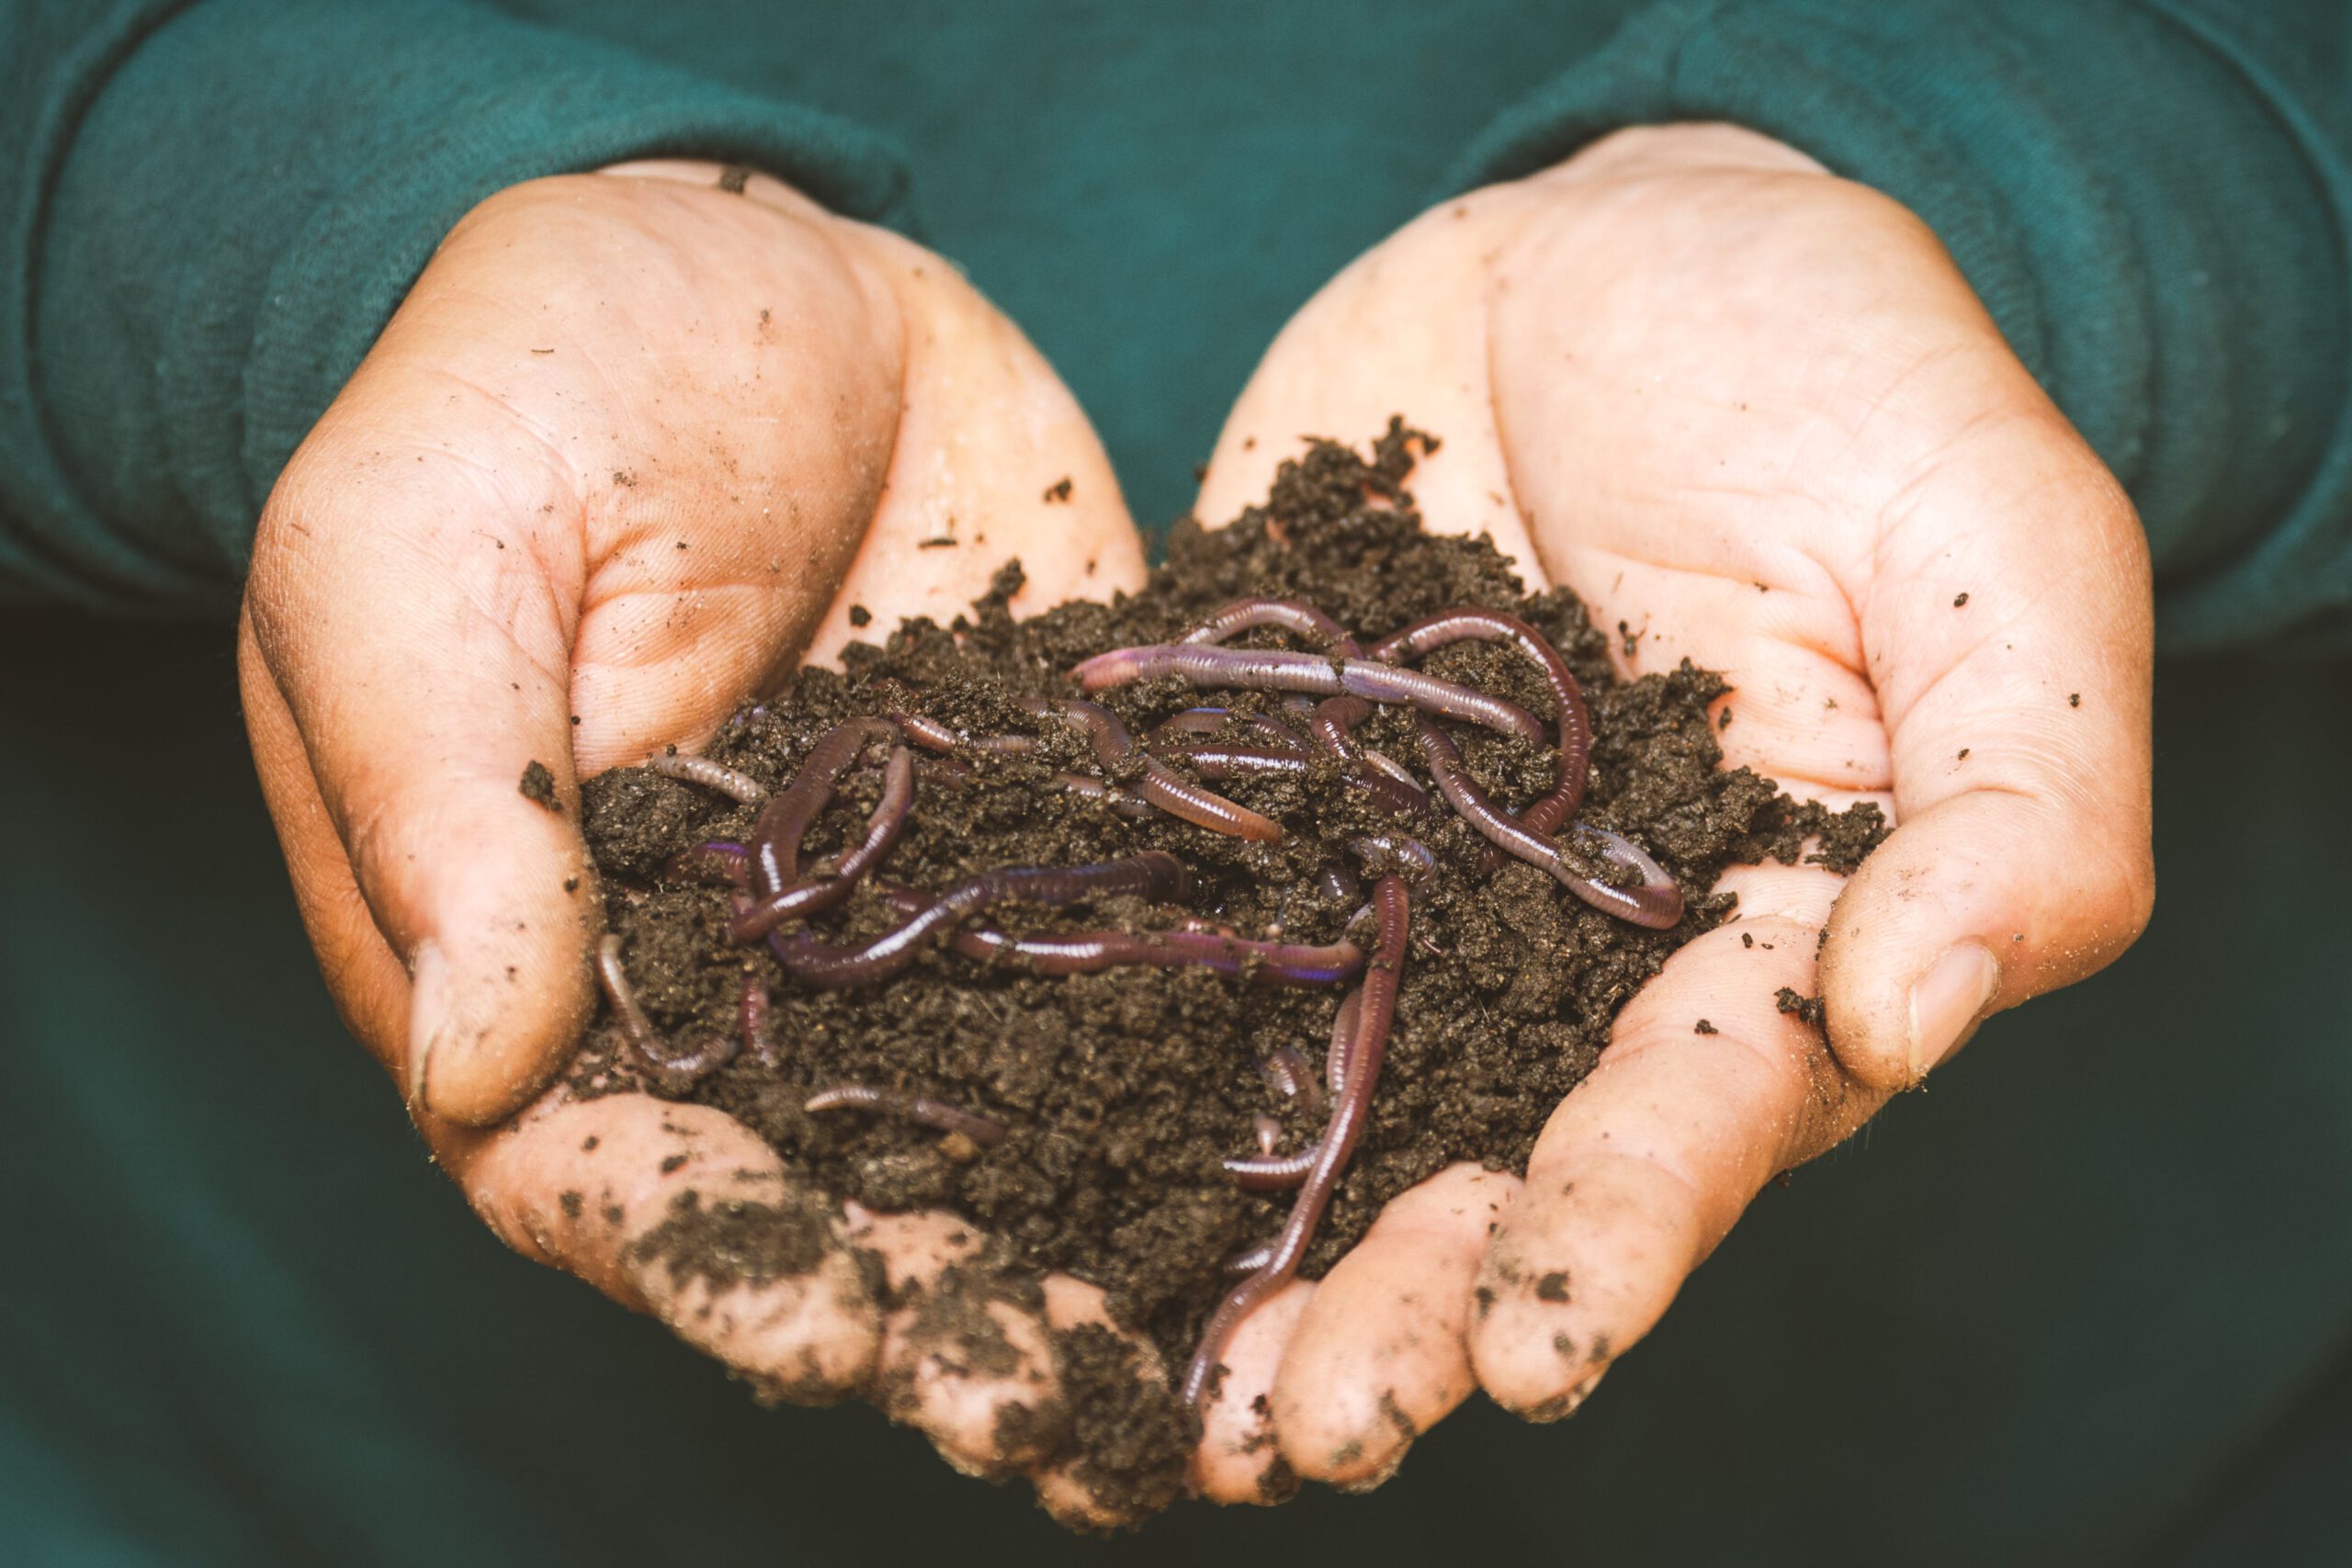 Hands holding soil with earthworms. Photo by Sippakorn Yamkasikorn: https://www.pexels.com/photo/earthworms-on-a-persons-hand-3696170/